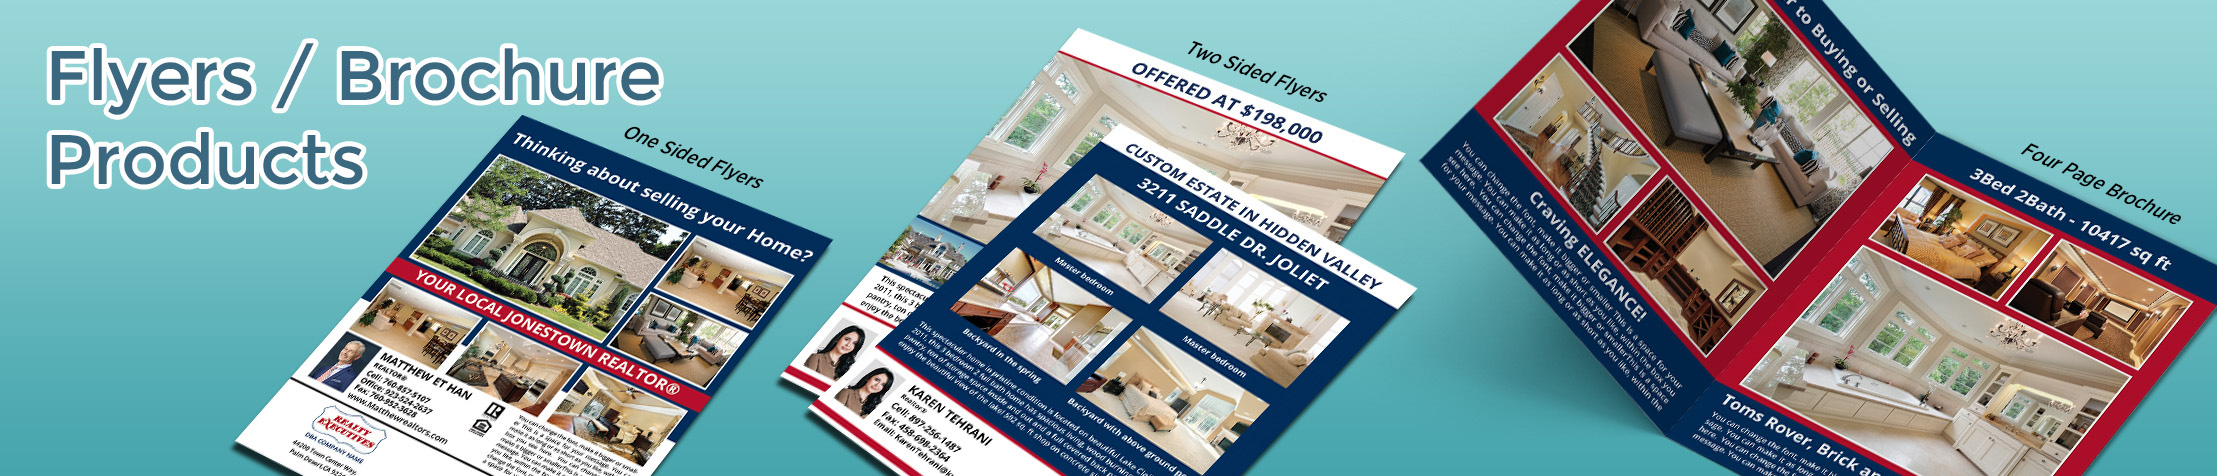 Realty Executives Real Estate Flyers and Brochures - Realty Executives  flyer and brochure templates for open houses and marketing | BestPrintBuy.com